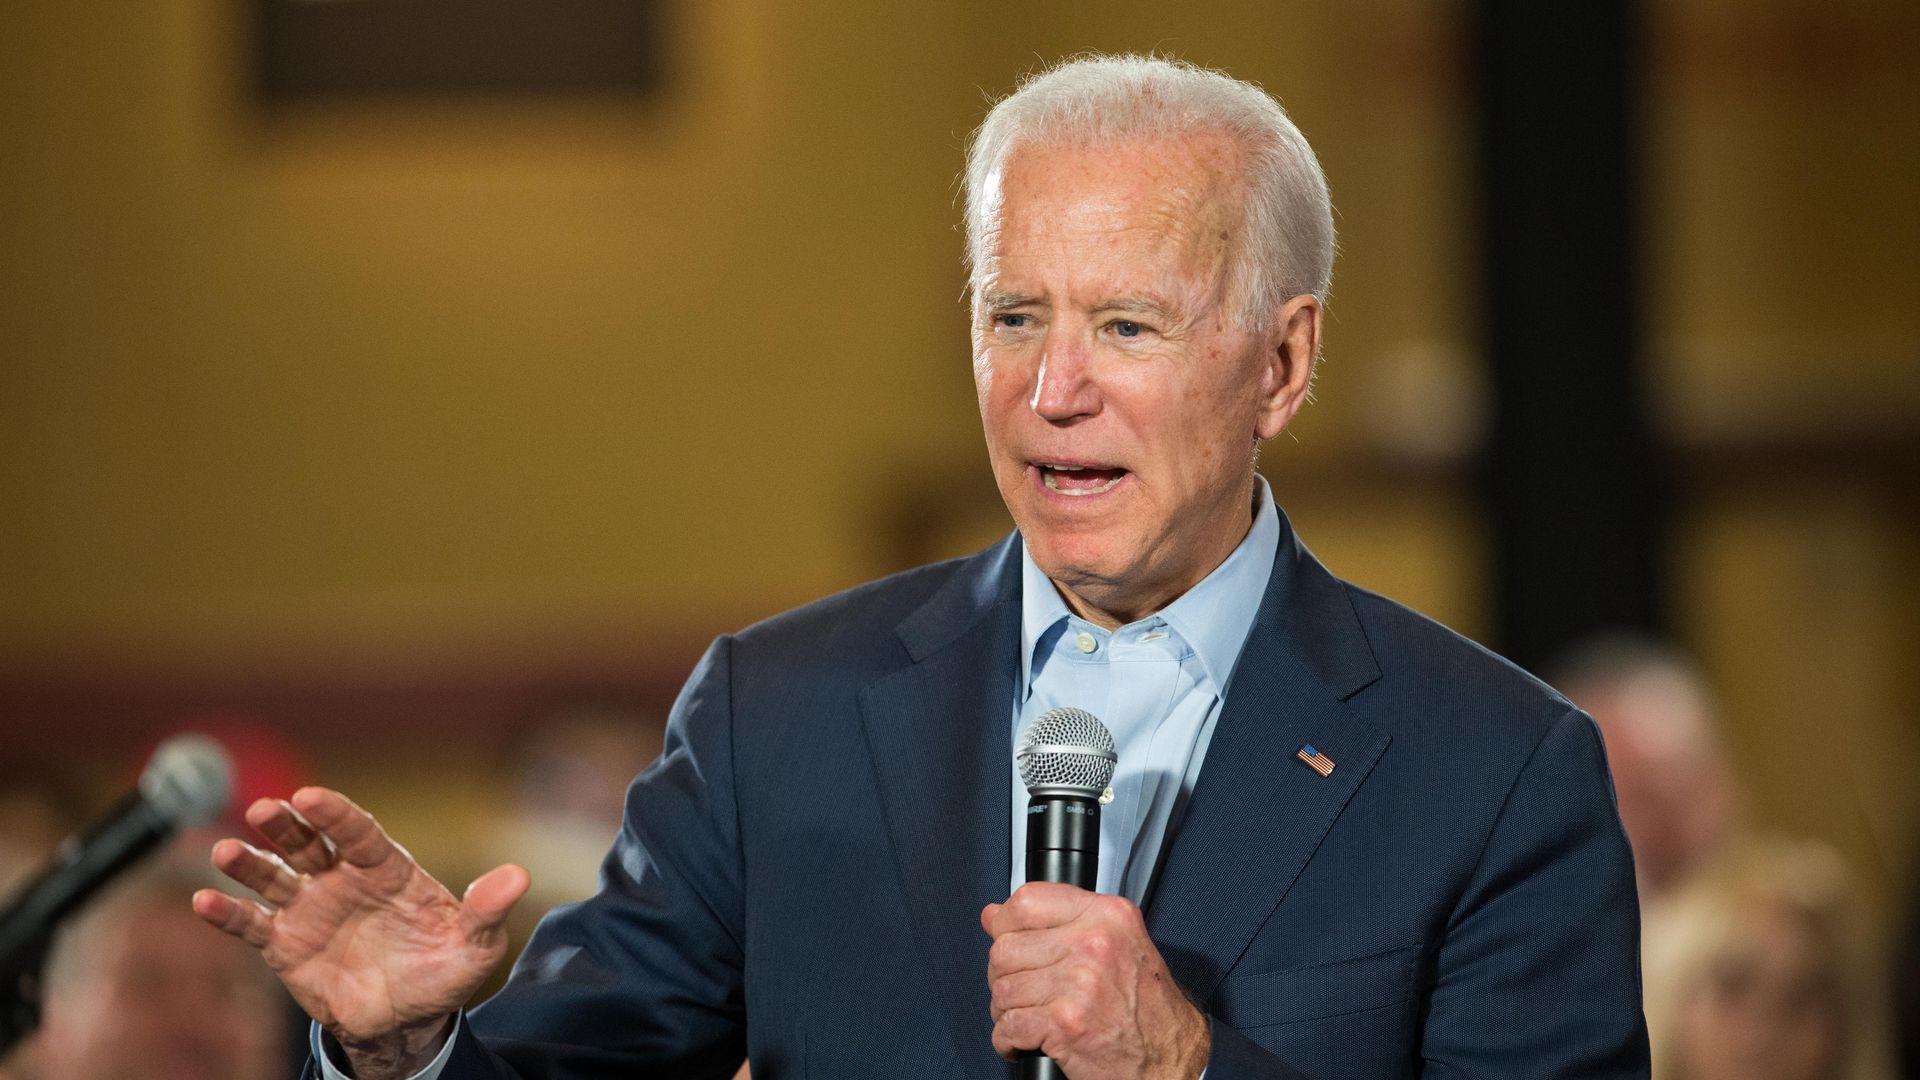 In this image, Biden stands and holds a microphone.